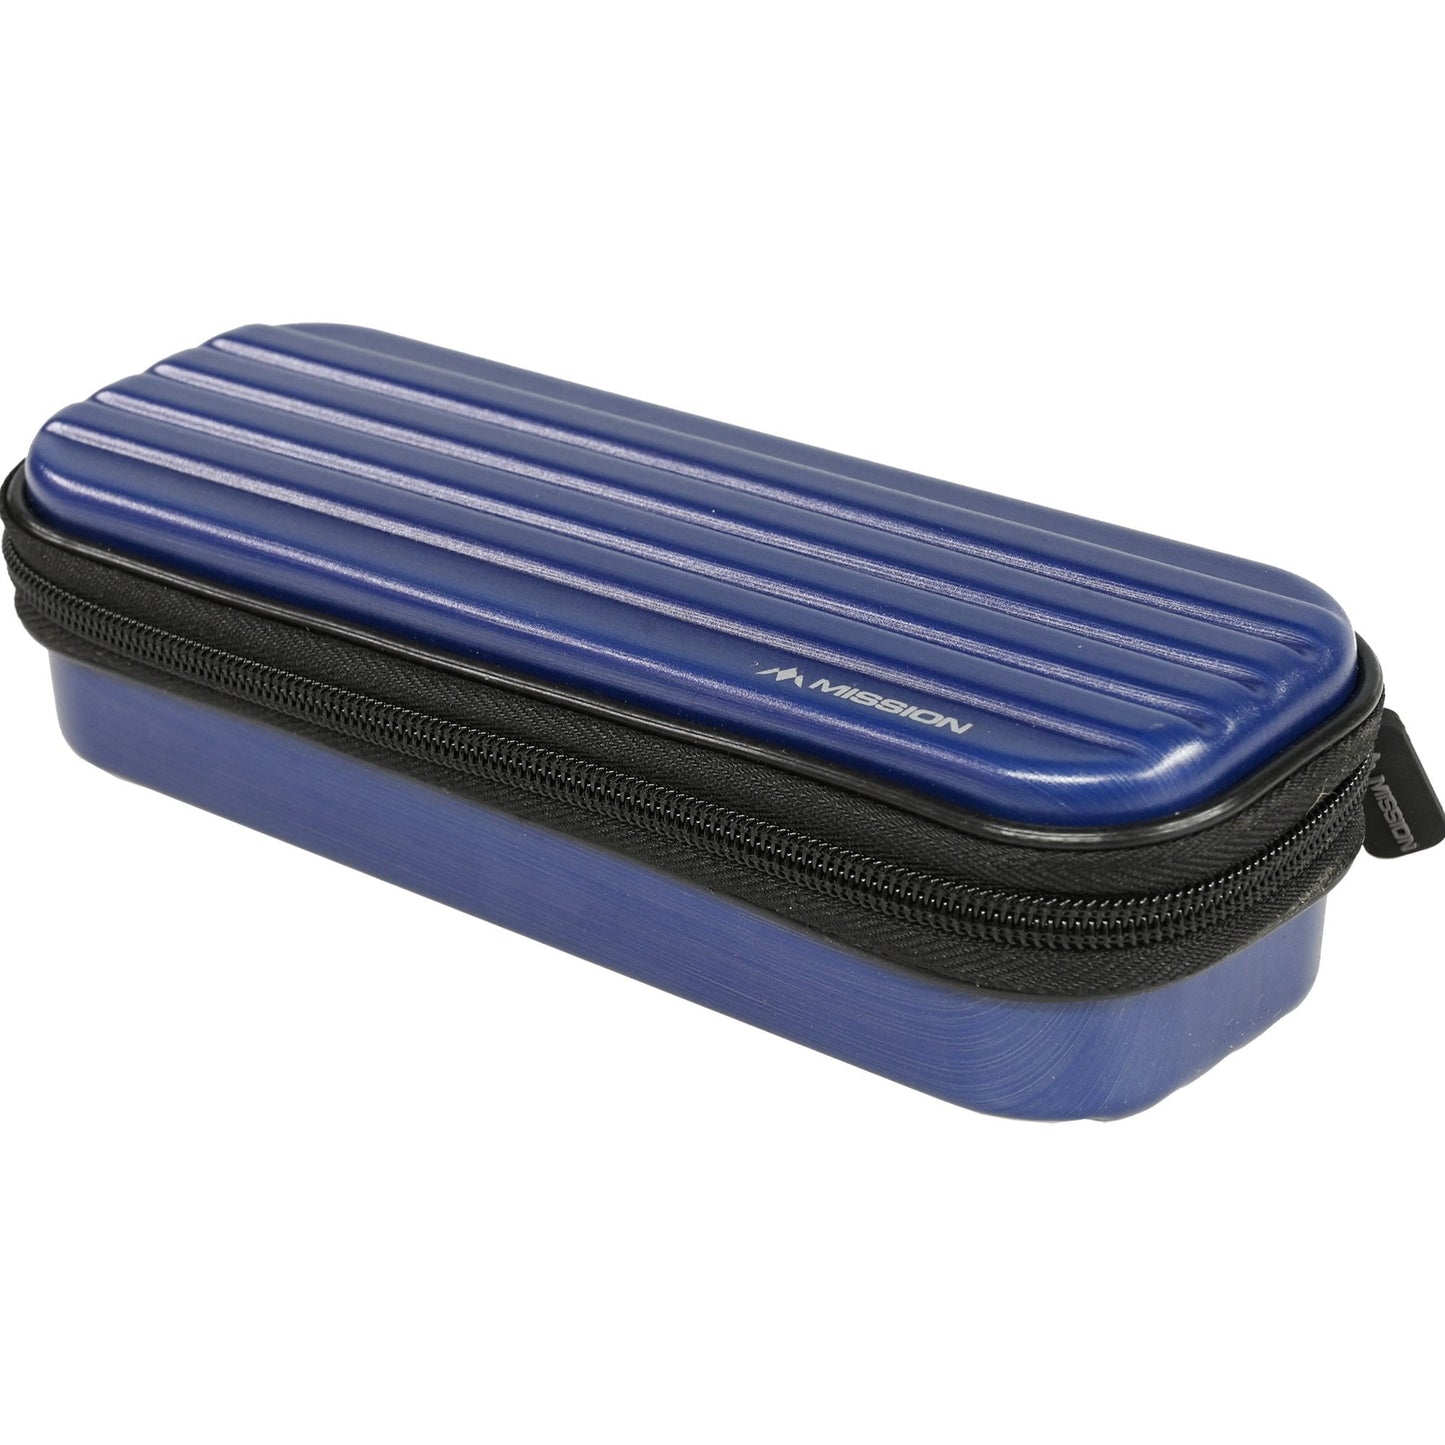 Mission ABS-1 Darts Case - Strong Protection - Metallic Dark Blue